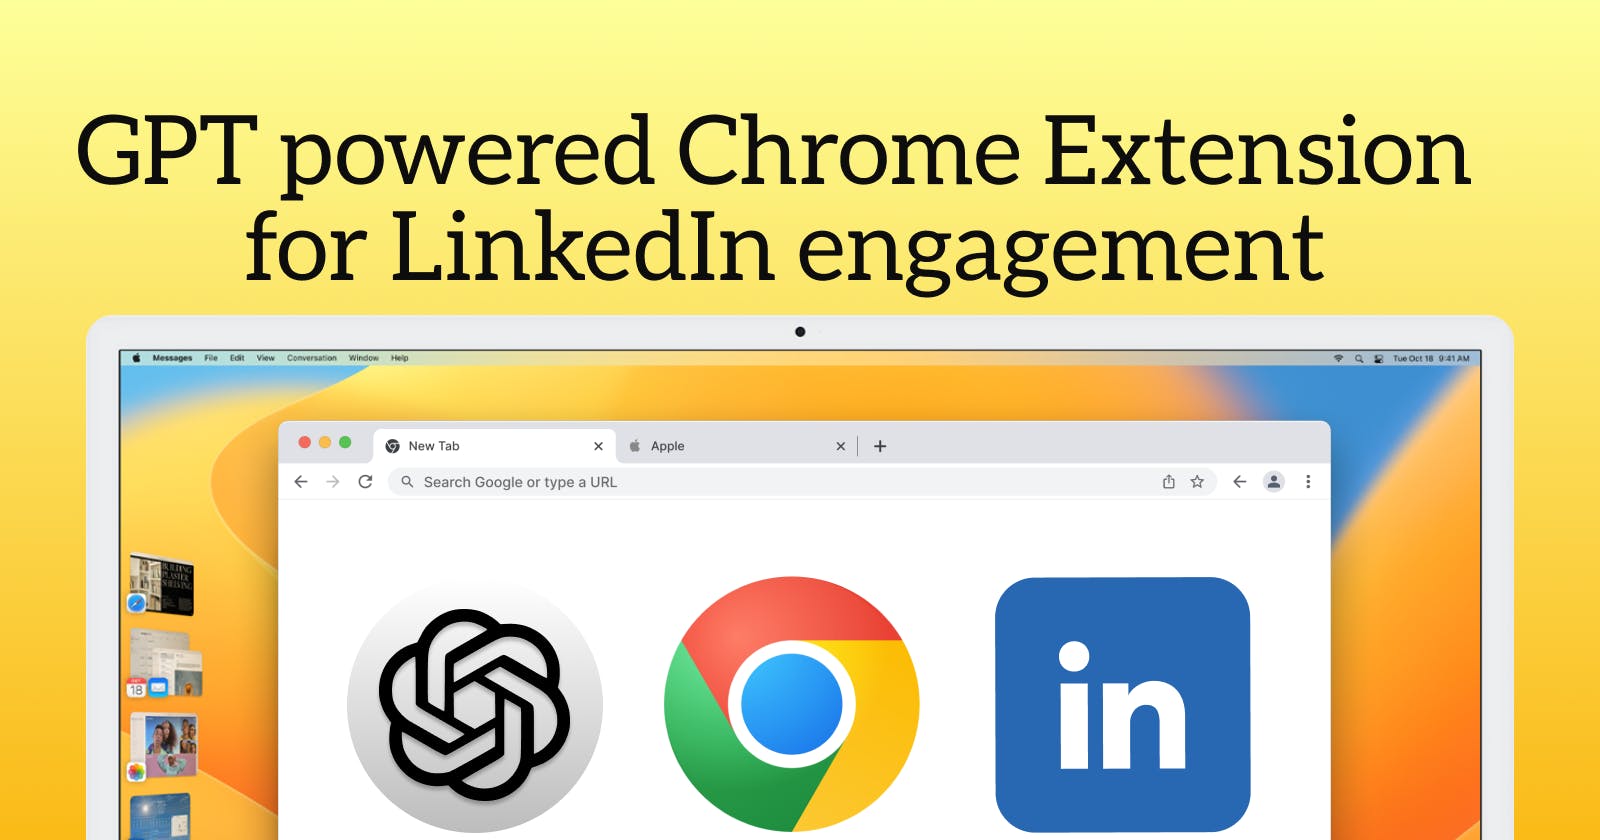 Writing a simple AI-powered chrome extension for LinkedIn